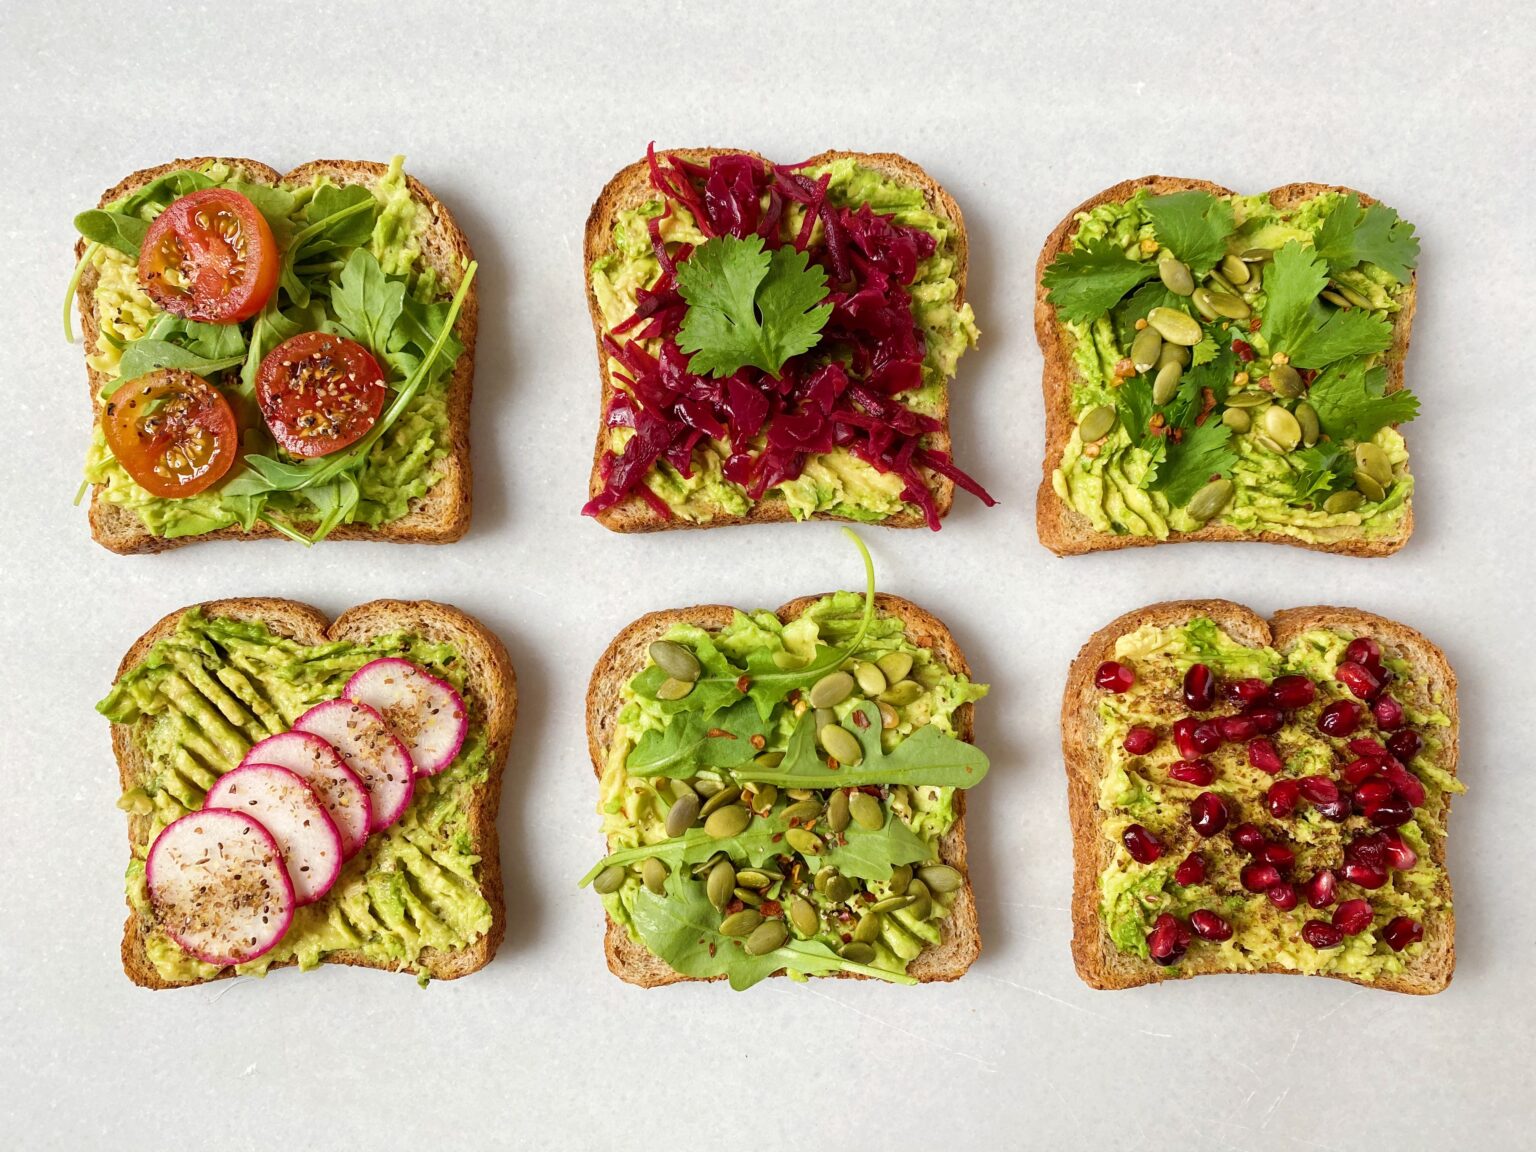 Sprouted Avocado Toast with Superfood Toppings | Heinen's Grocery Store